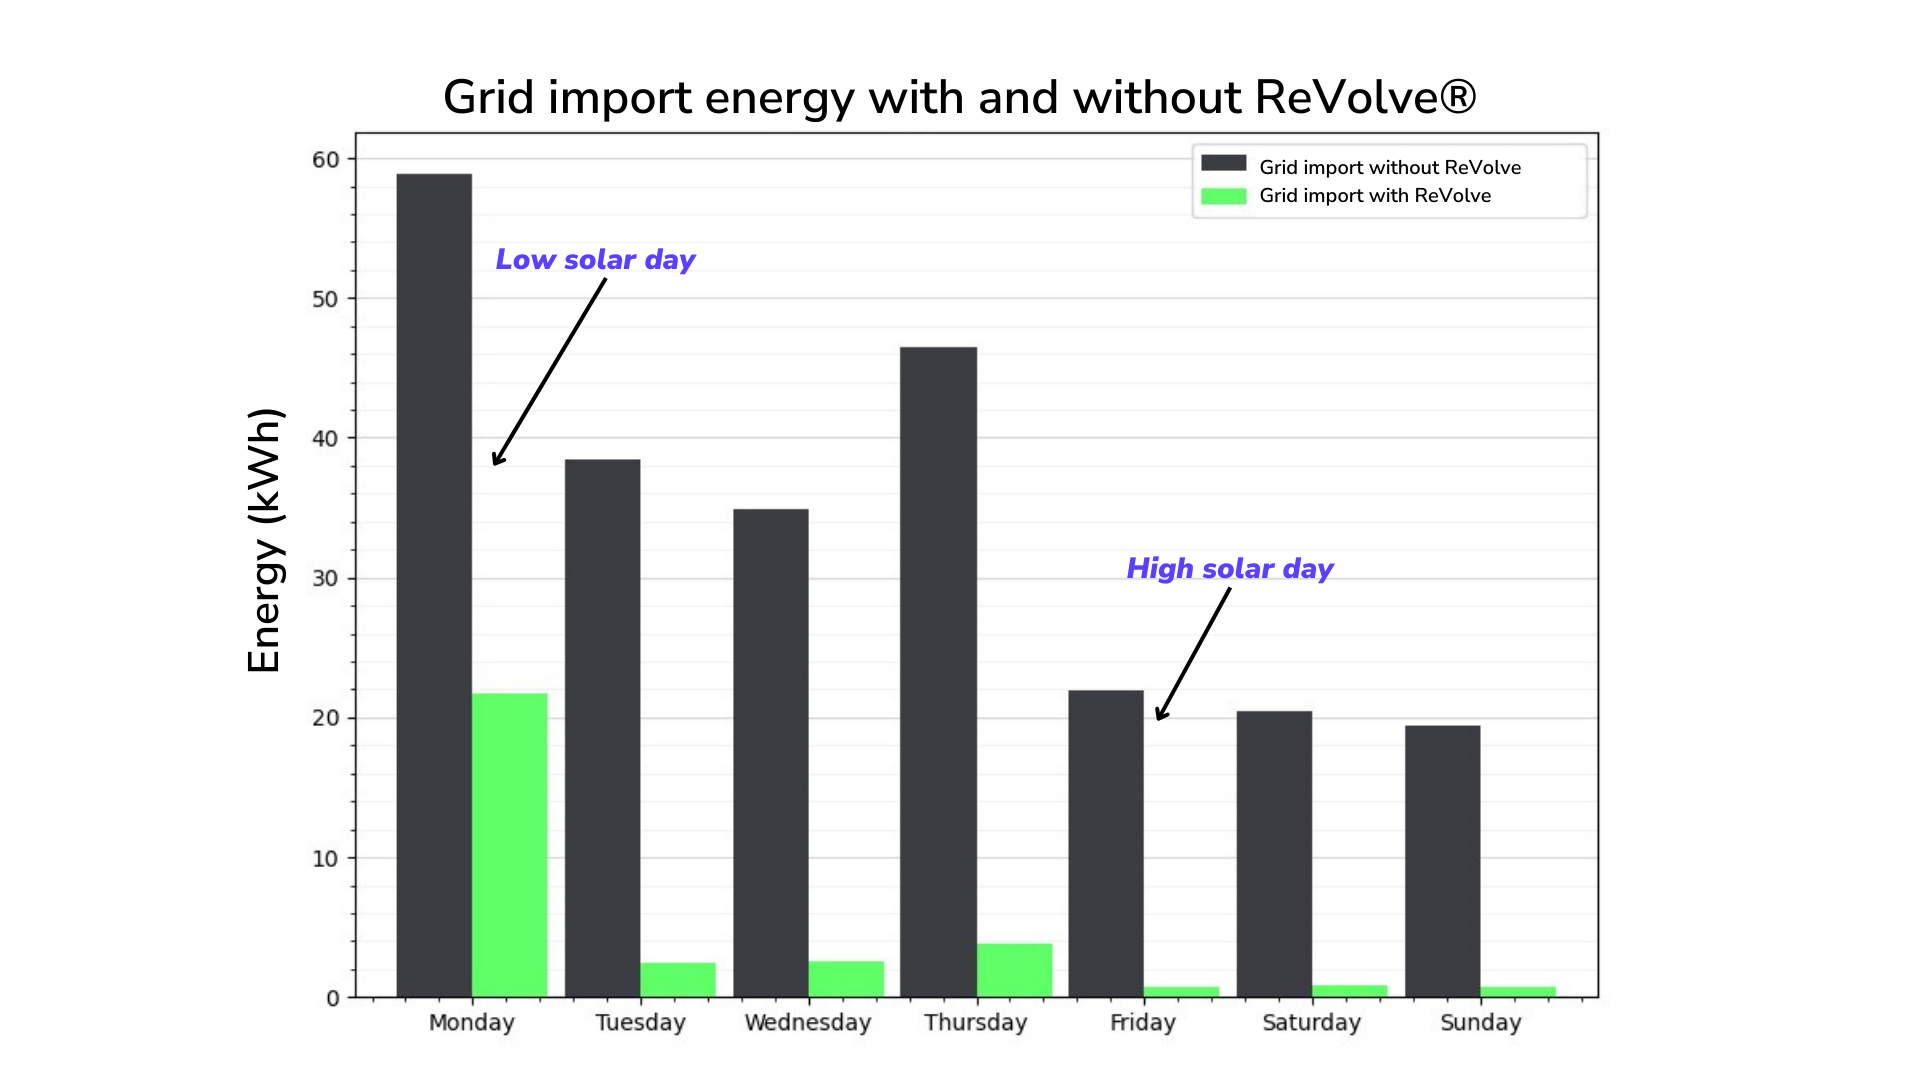 Graph showing grid import with and without the ReVolve